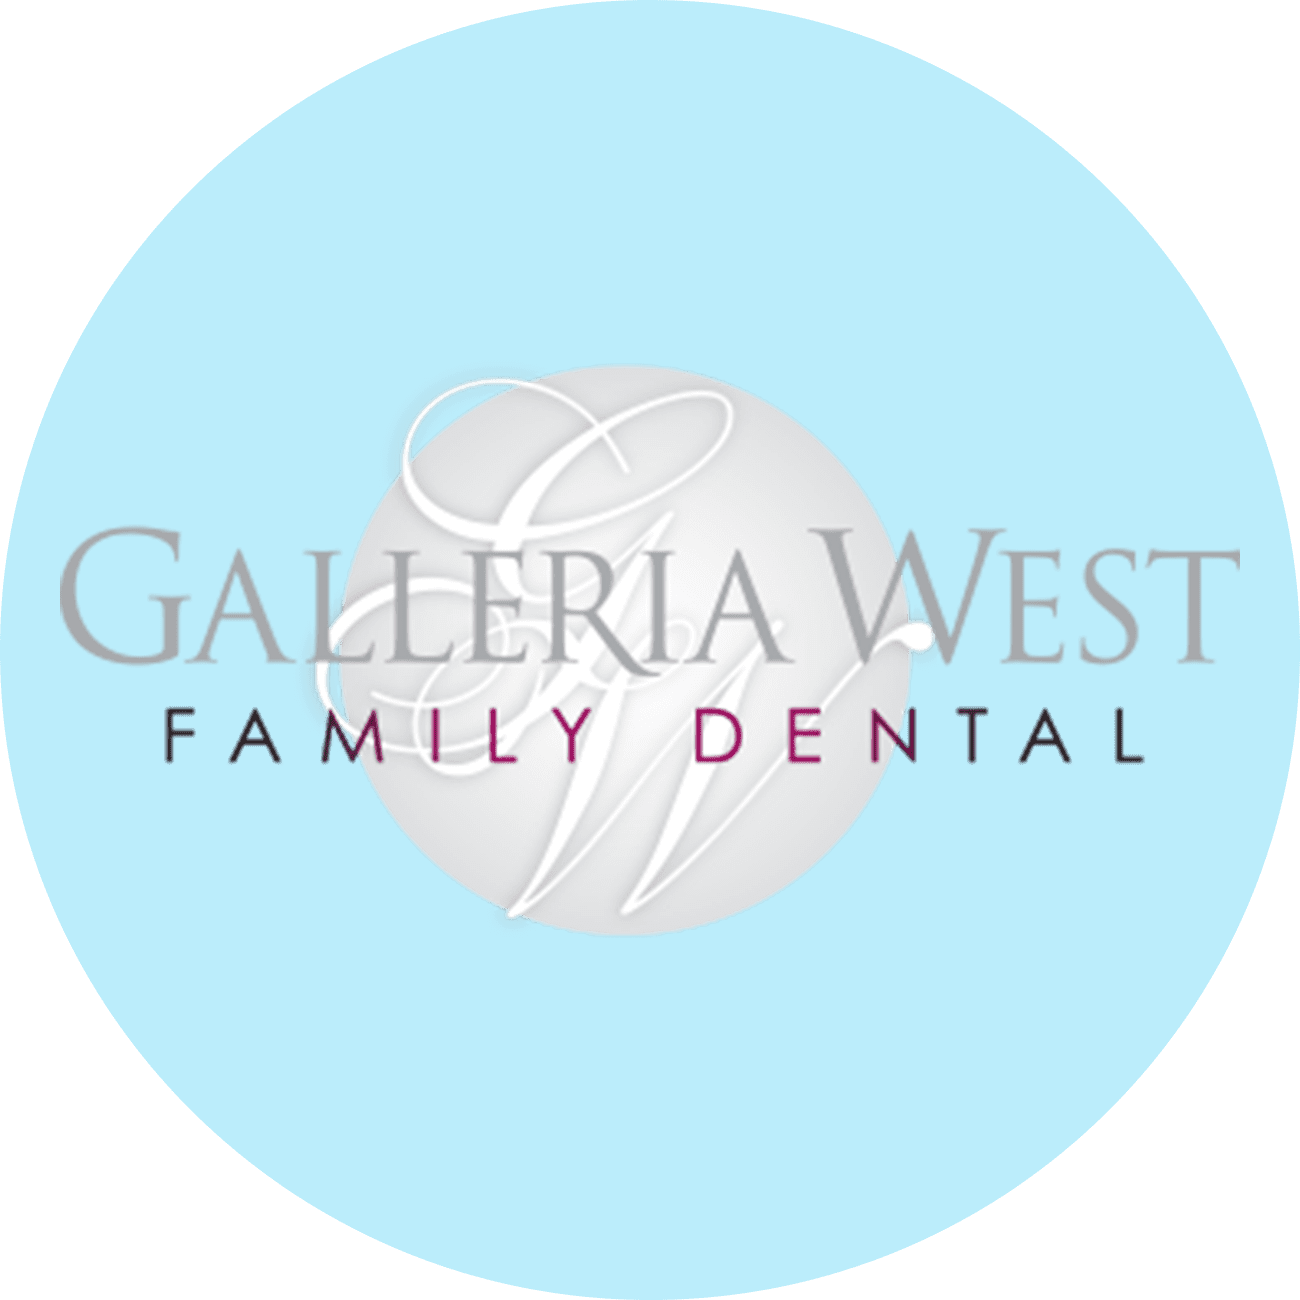 Marytherese B., Office Manager, Galleria West Family Dental